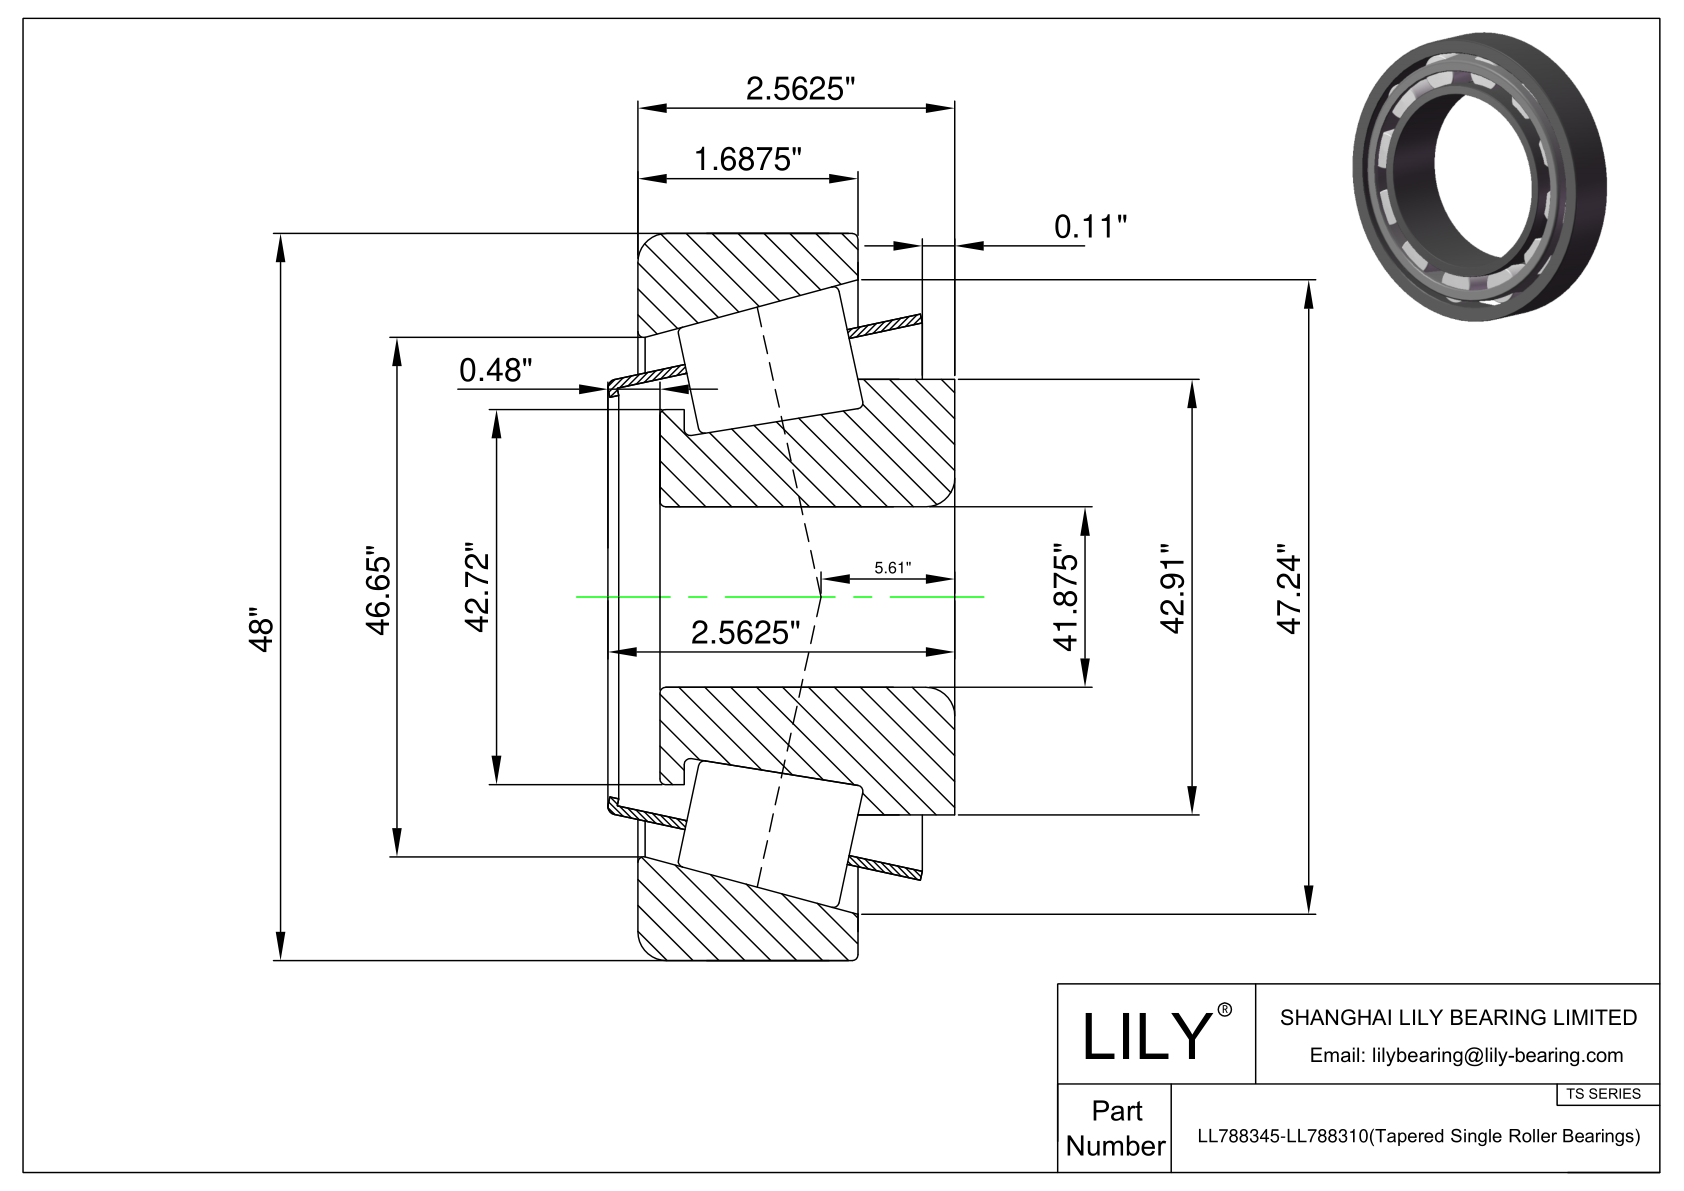 LL788345-LL788310 TS (Tapered Single Roller Bearings) (Imperial) cad drawing